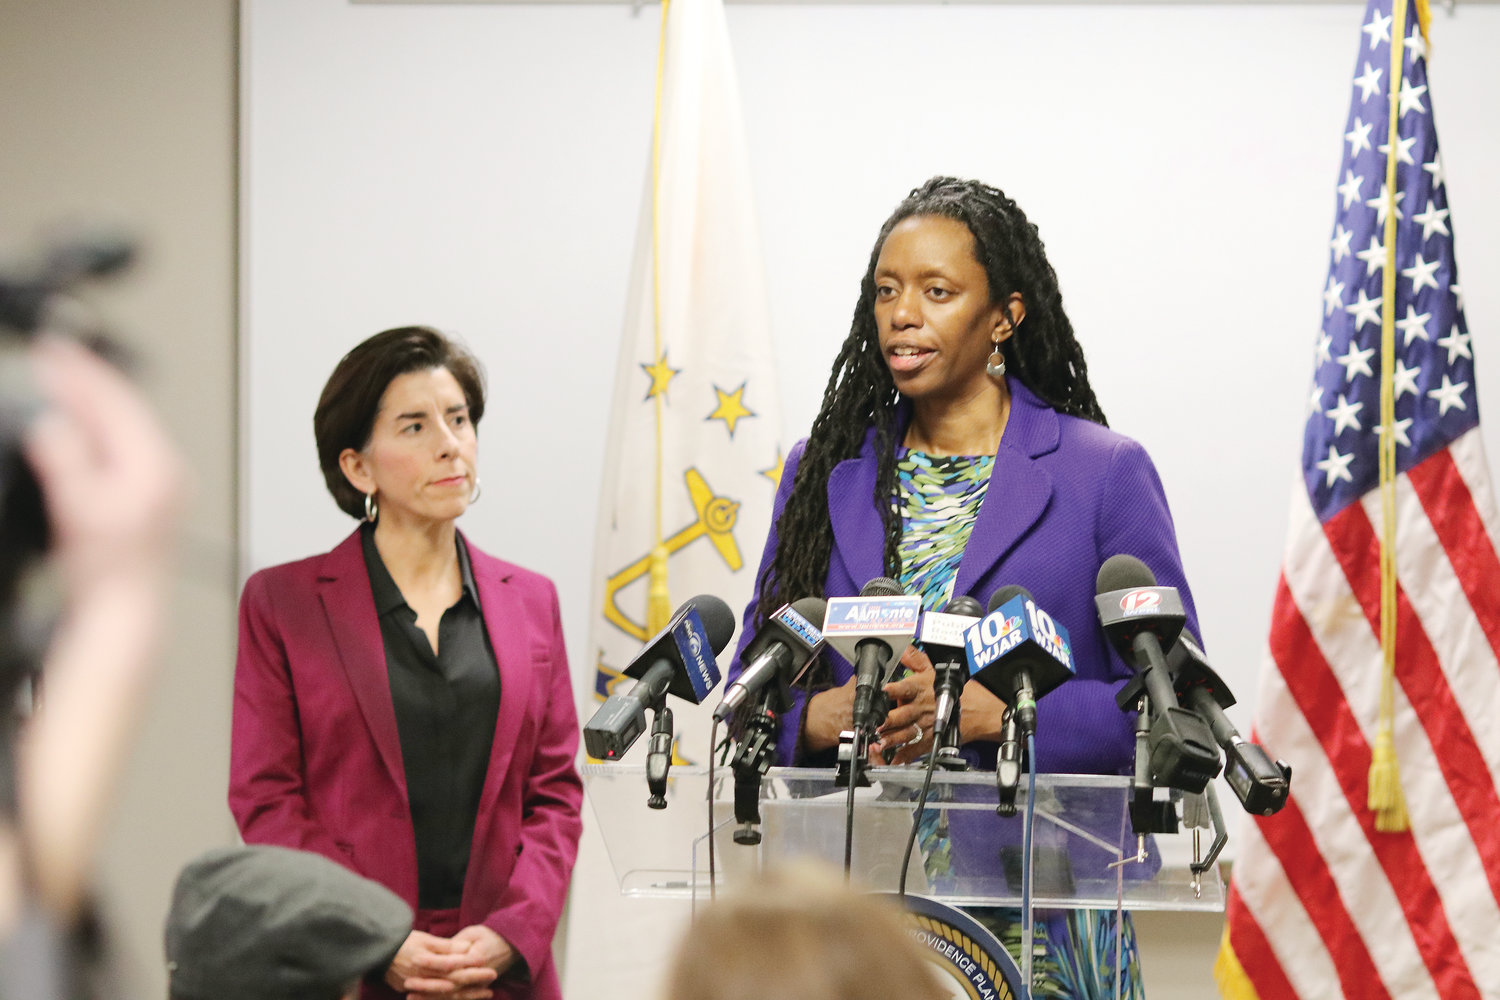 At a press conference at the Department of Administration, held March 9, Dr. Nicole Alexander-Scott, Rhode Island Director of Health, shares ways to keep nursing home residents safe from coronavirus. At the conference, Governor Gina Raimondo, at left, officially declared a state of emergency over the virus.